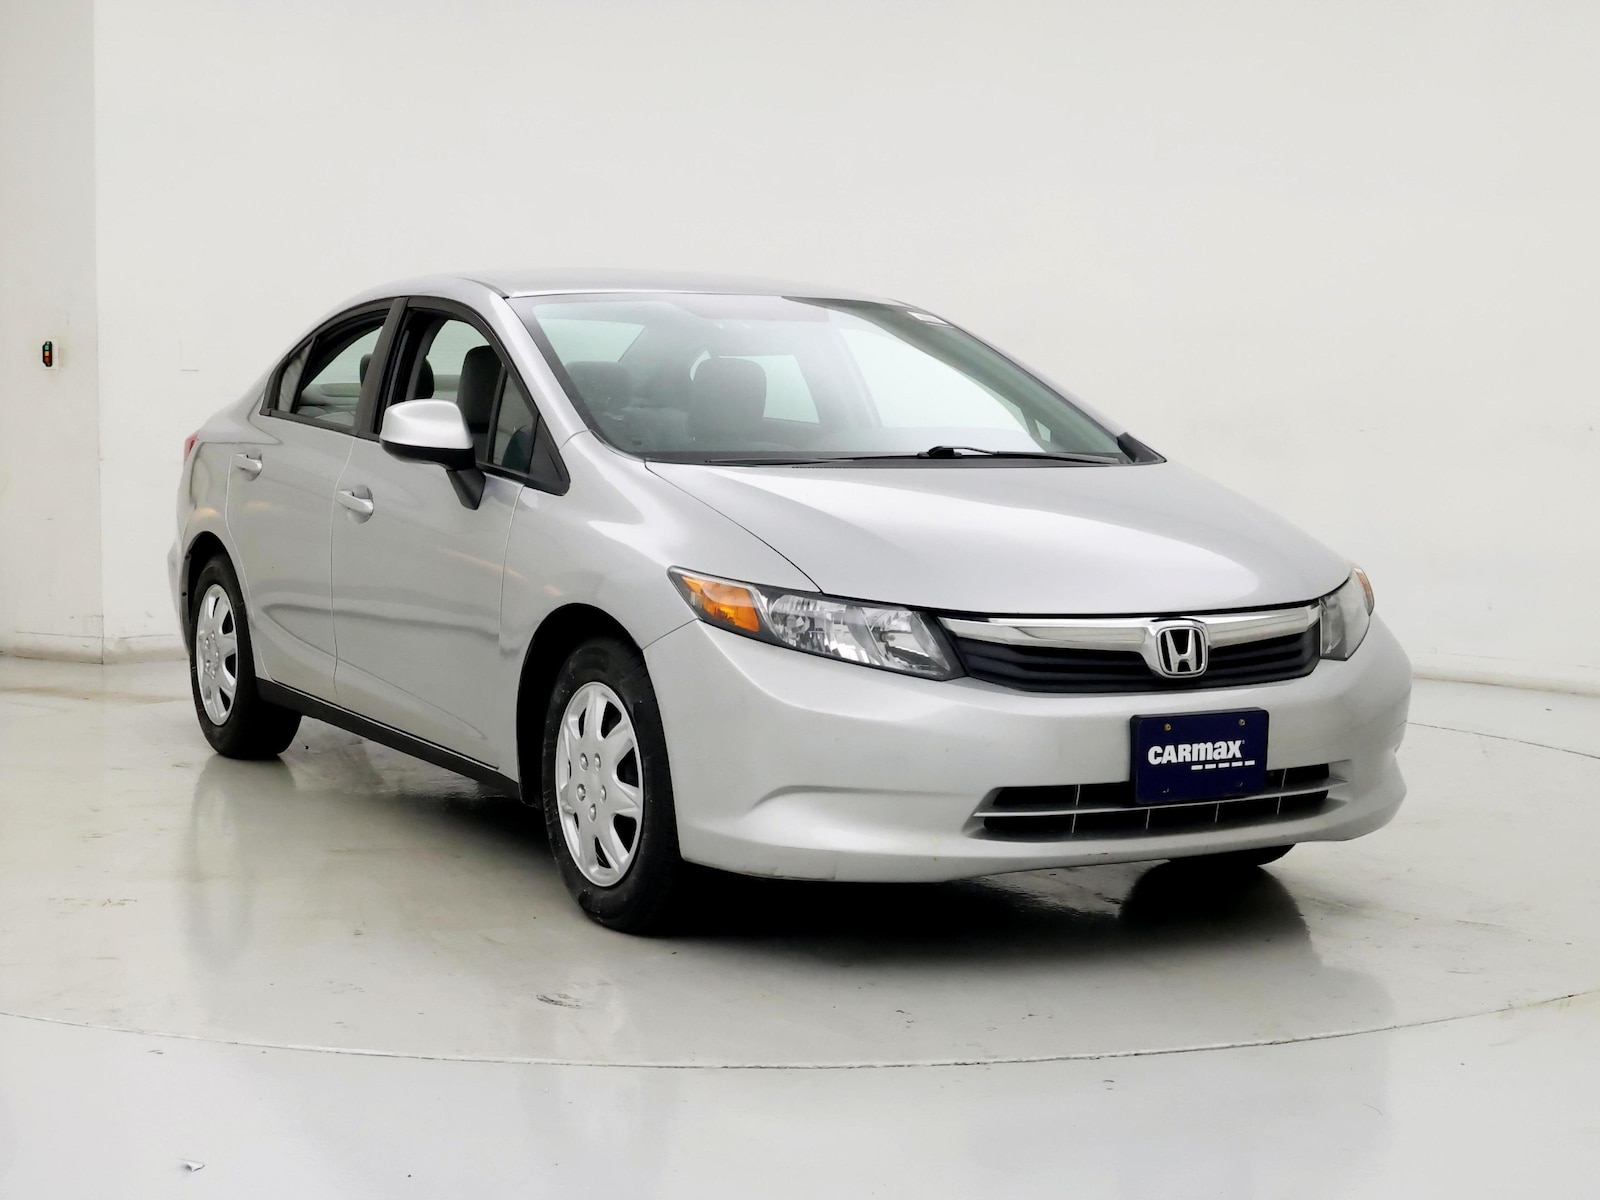 Used 2012 Honda Civic LX with VIN 2HGFB2F55CH599188 for sale in Spokane Valley, WA